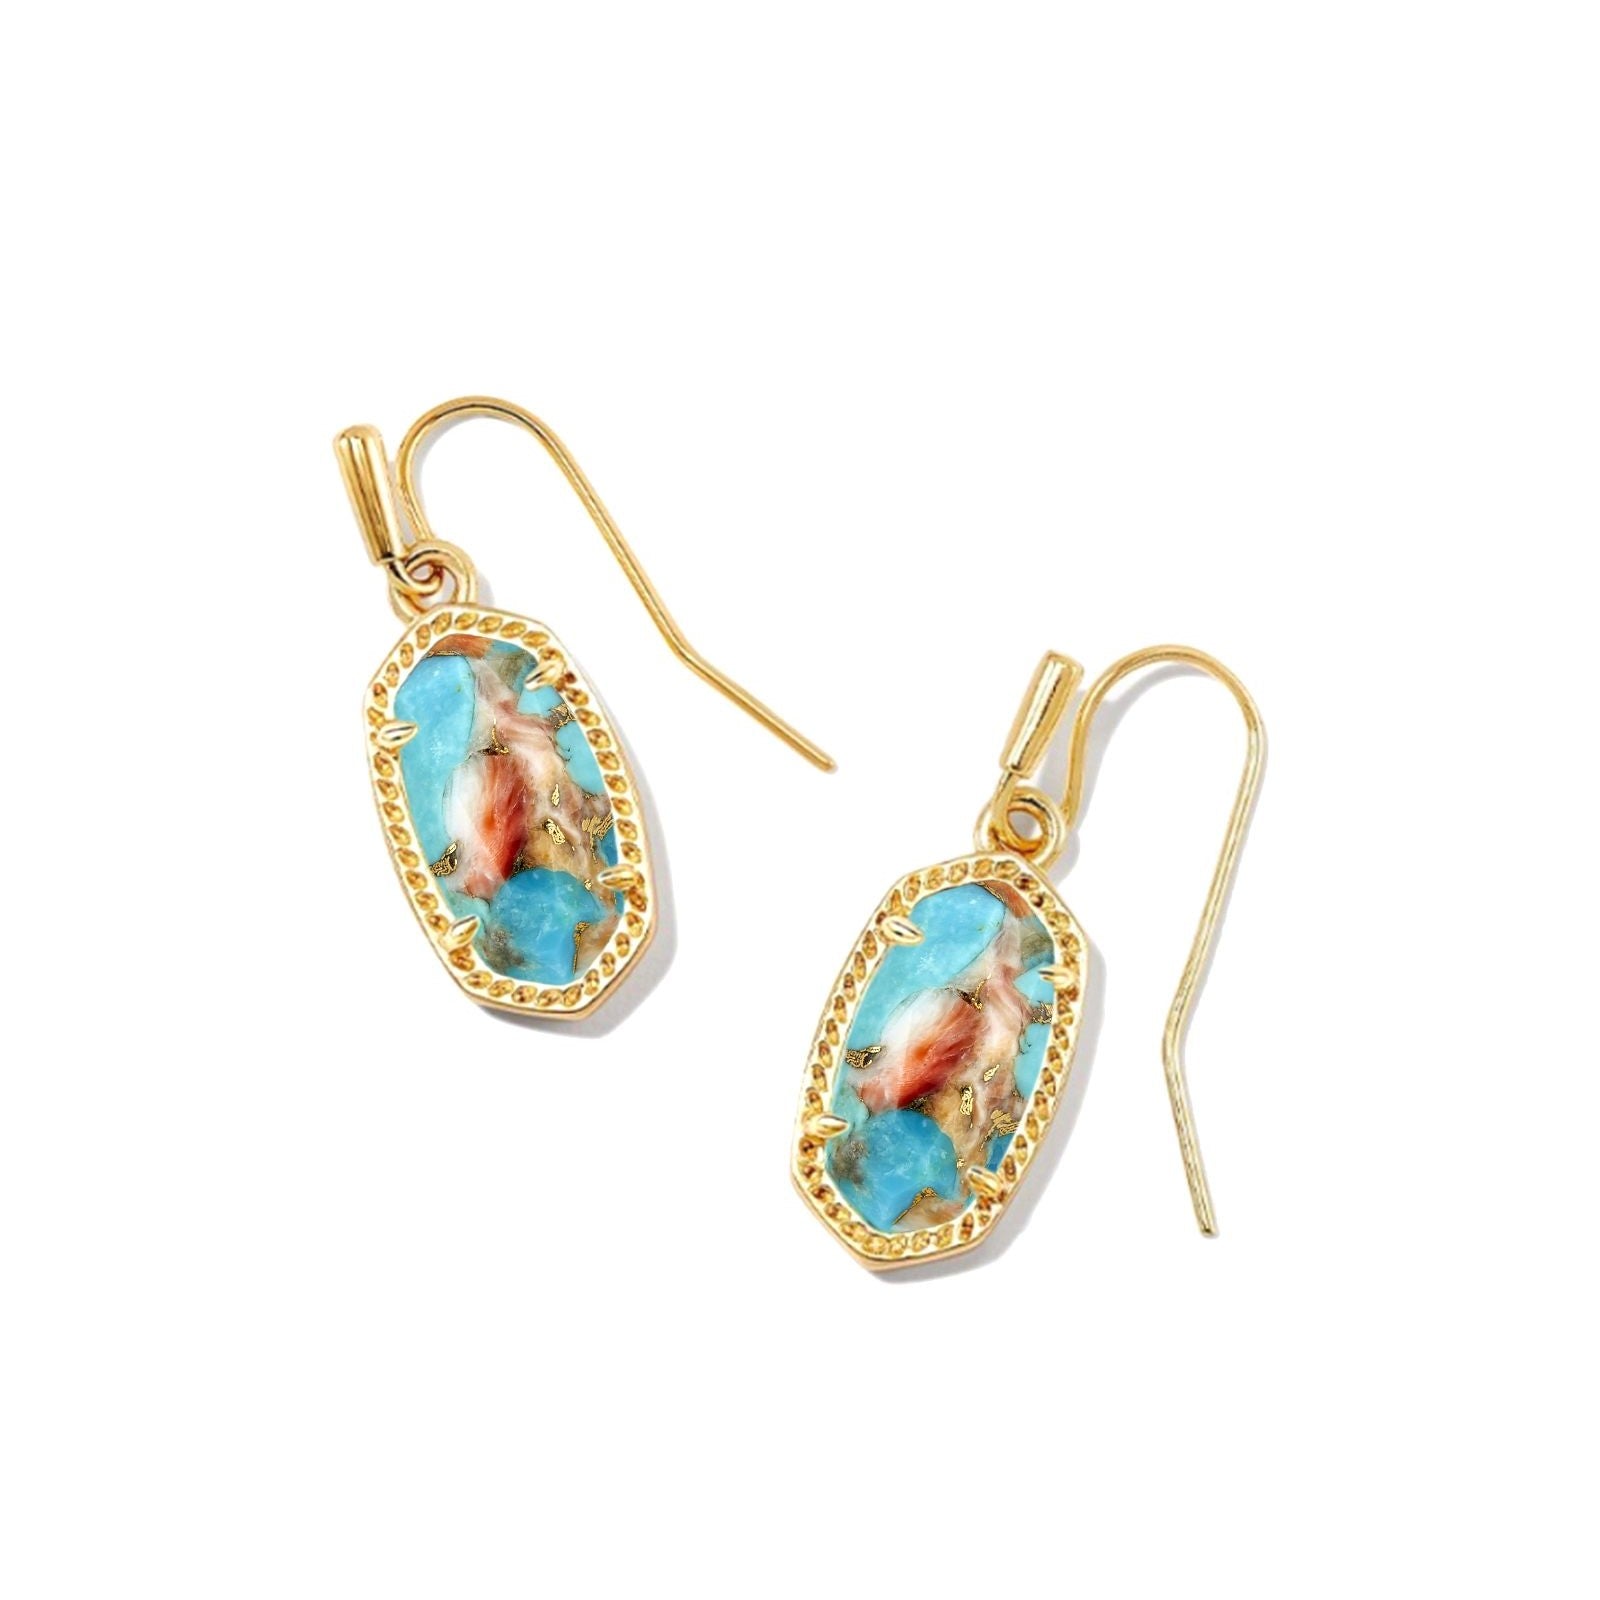 Kendra Scott | Lee Gold Earrings in Bronze Veined Turquoise Magnesite Red Oyster - Giddy Up Glamour Boutique